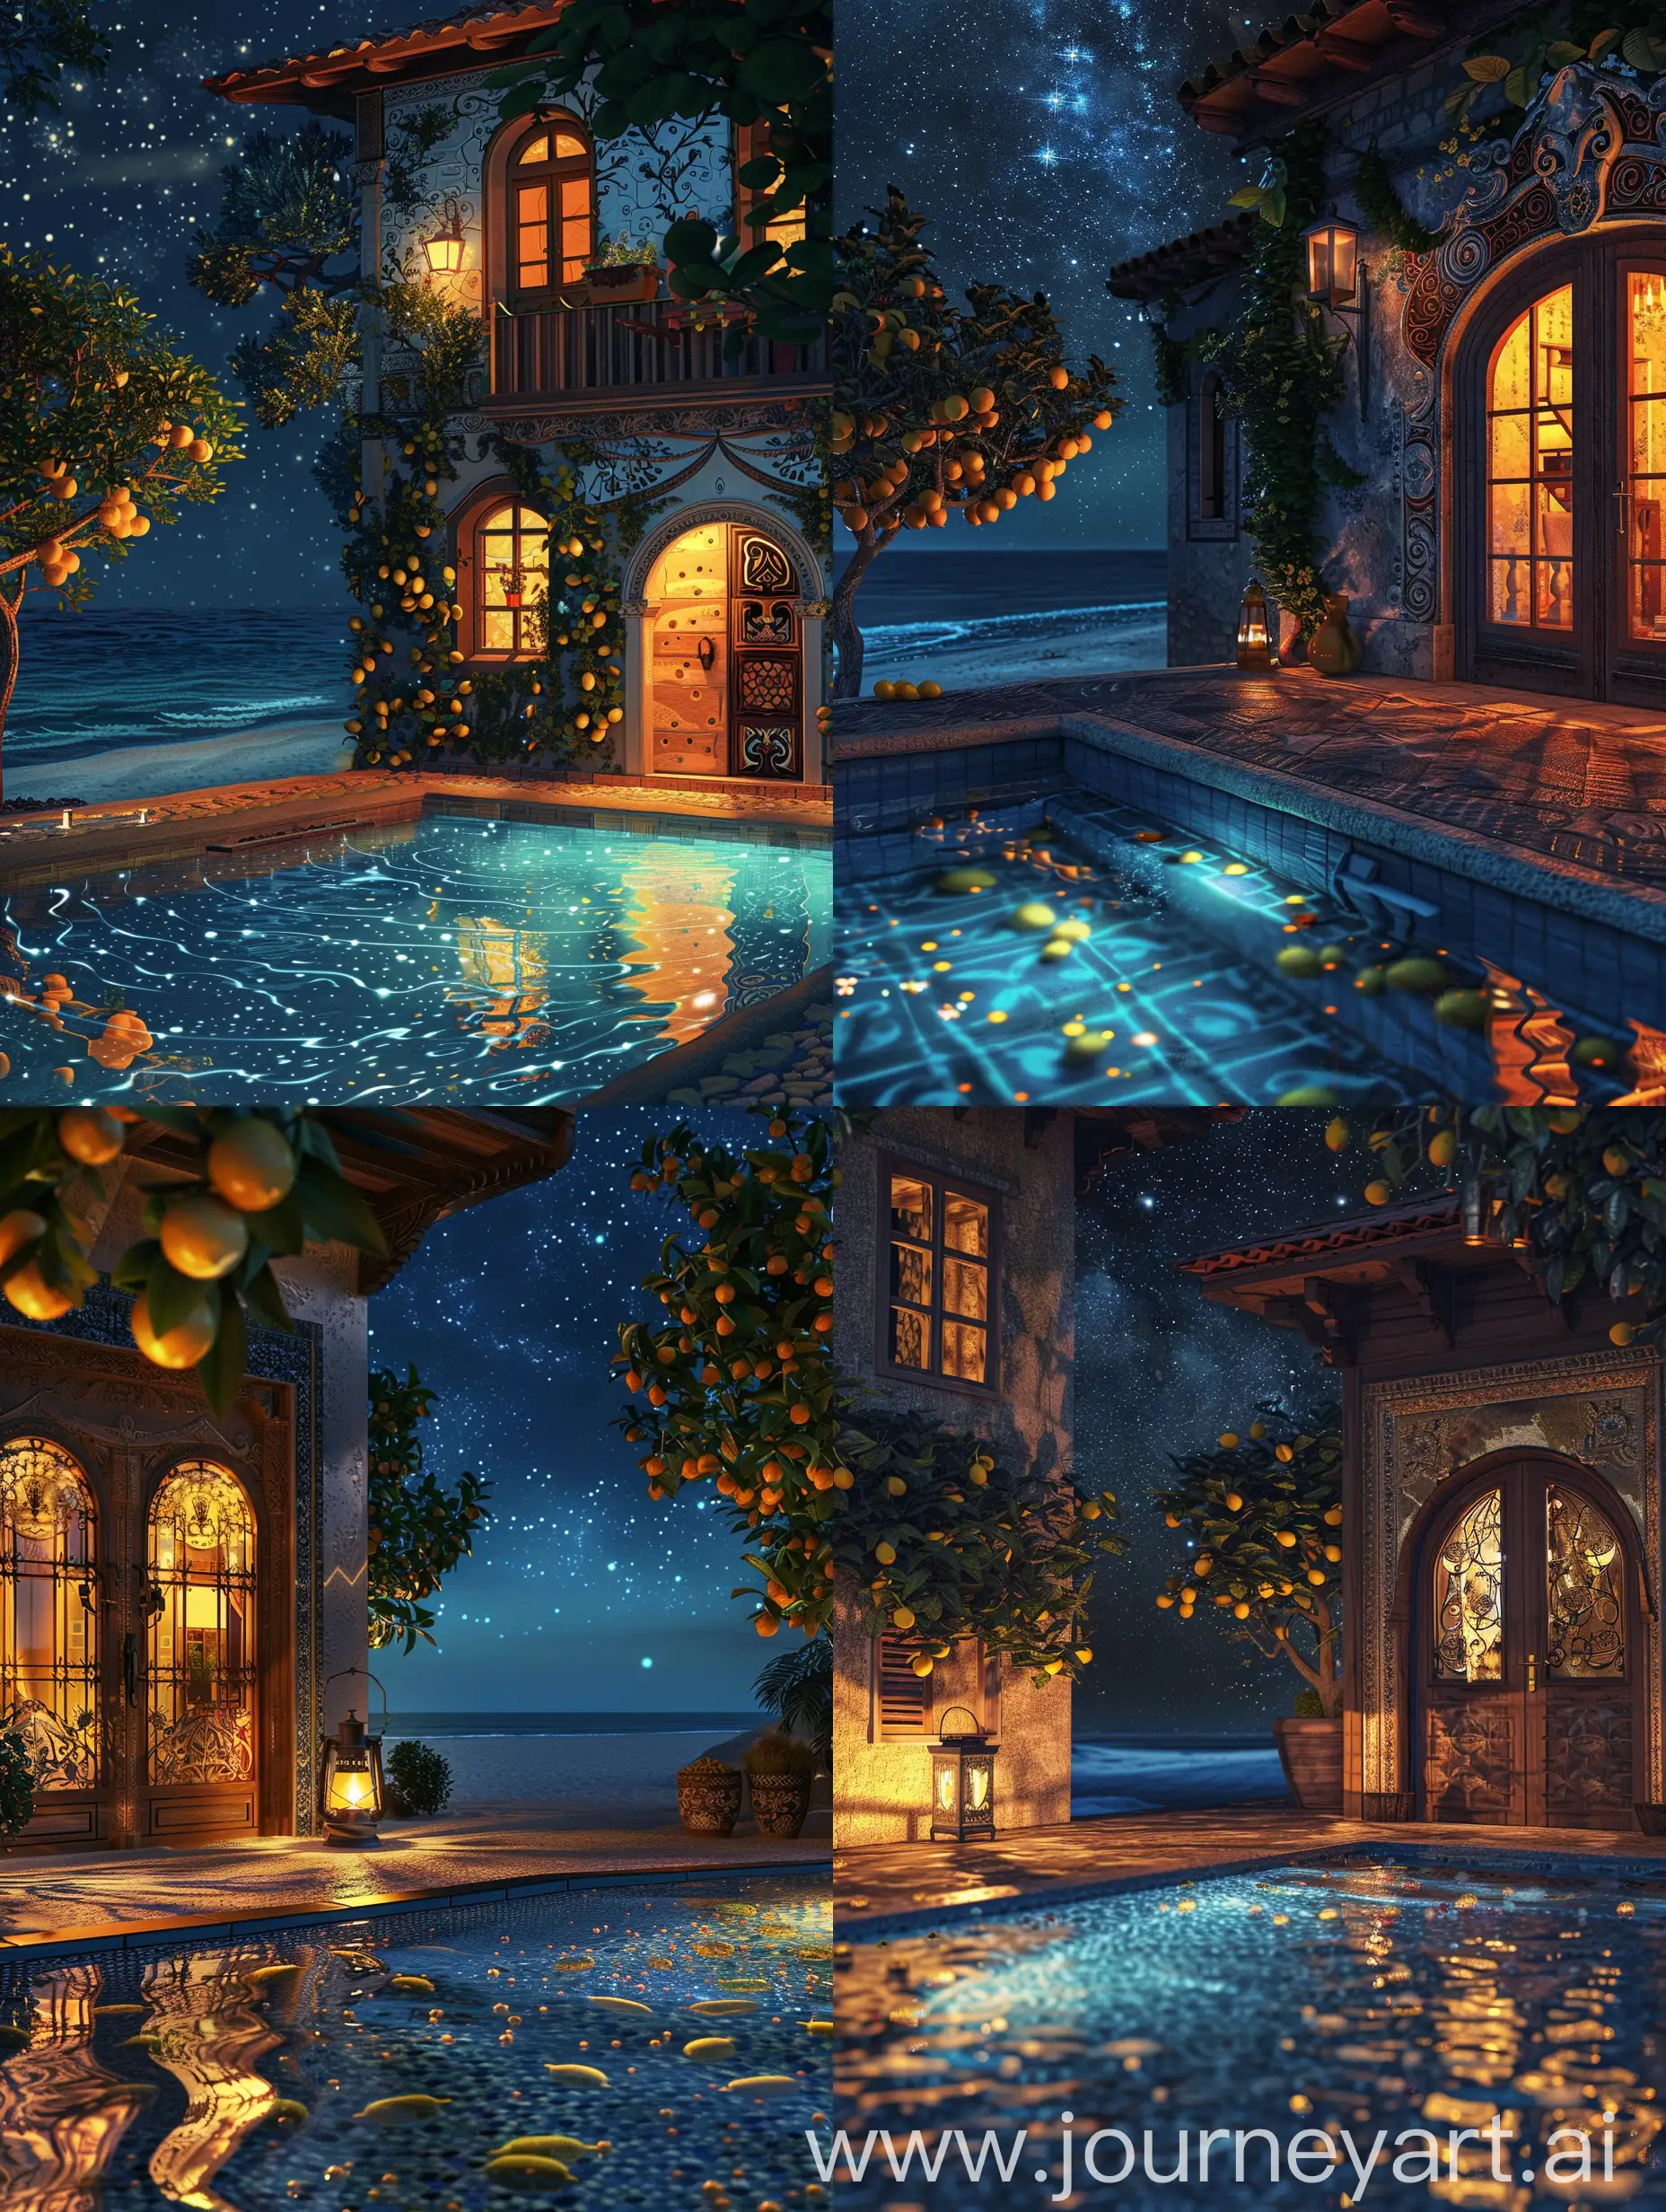 On a quiet, starry night, near a beach, there is a house, with a swimming pool and lemon trees.  The swimming pool reflects the stars, and the windows of the house are illuminated with warm lights indicating the presence of people living inside.  There is a lantern that illuminates the decorated wooden door of this house.